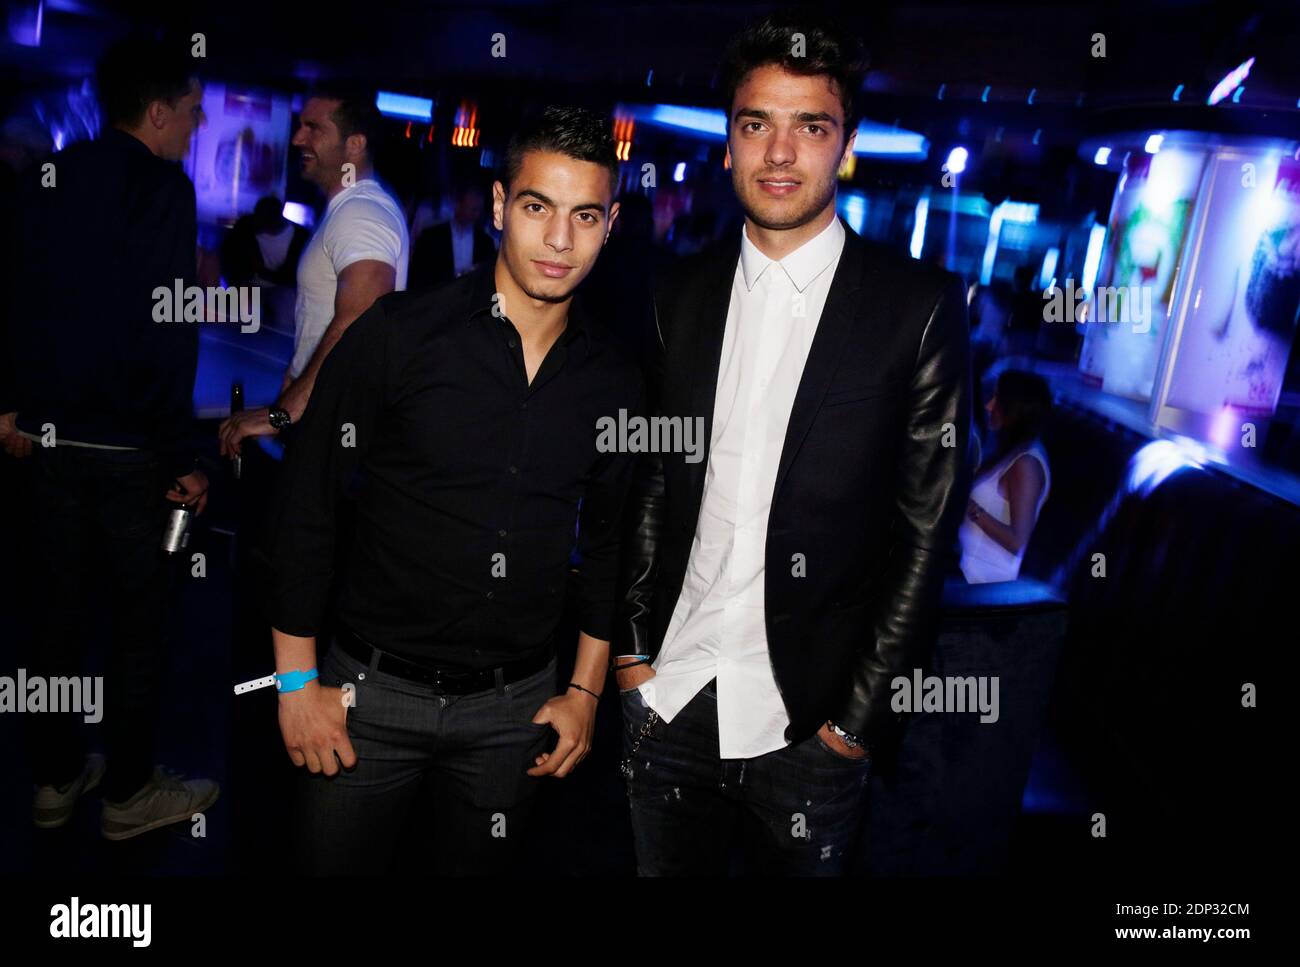 Wissam Ben Yedder and Clement Grenier attending an Adidas event held at L'Arc in Paris, France, on May 28, 2015. Photo by ABACAPRESS.COM Stock Photo